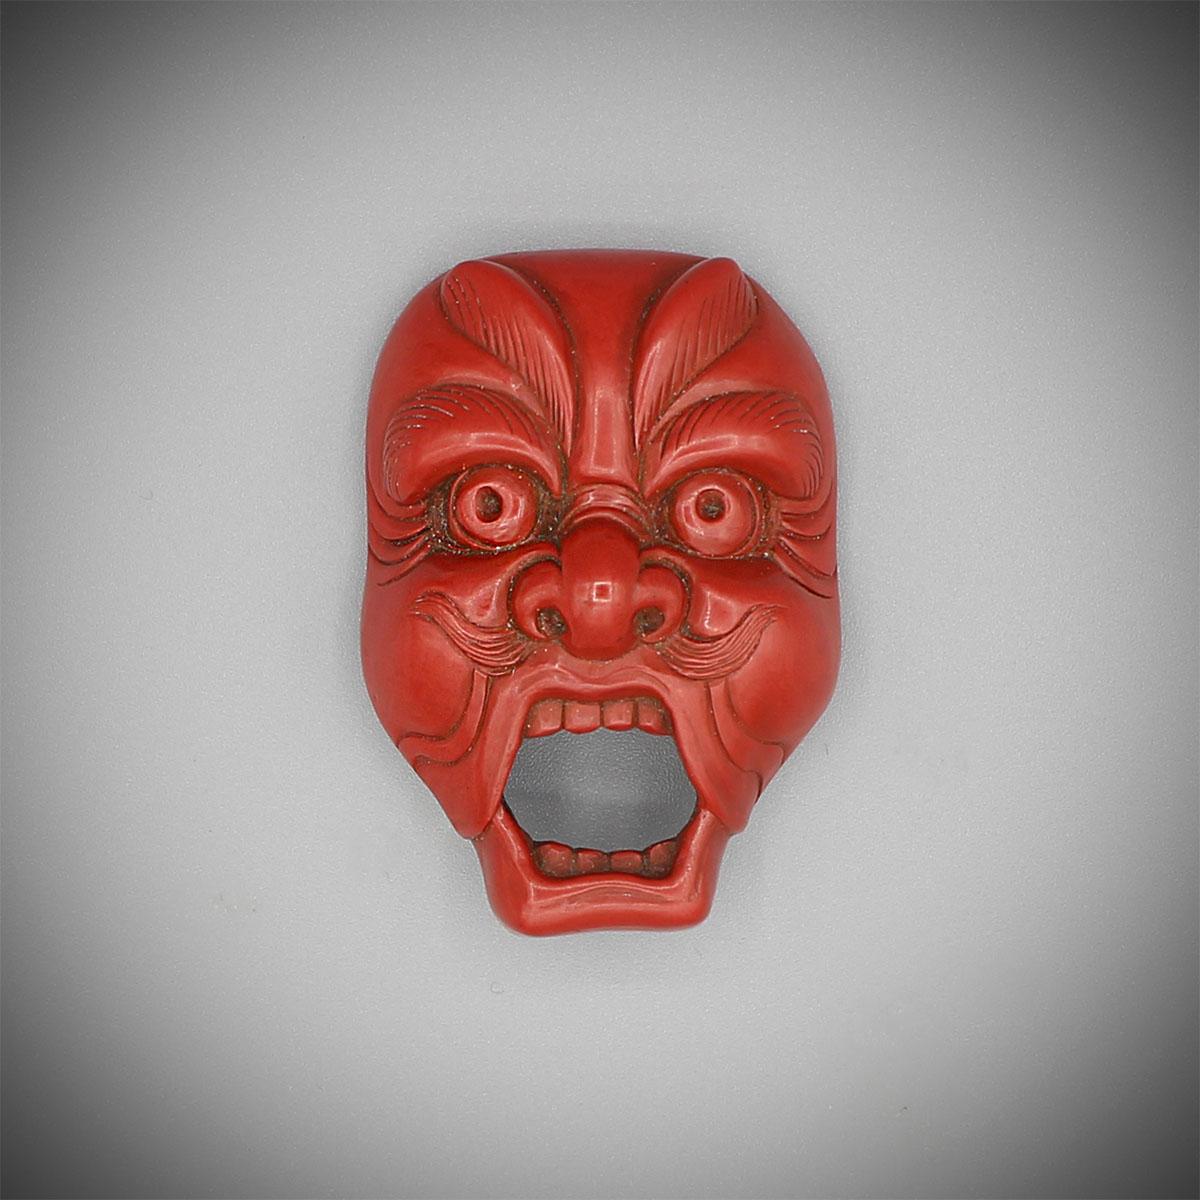 Carved Red Lacquer Mask of Genjoraku by Hosai